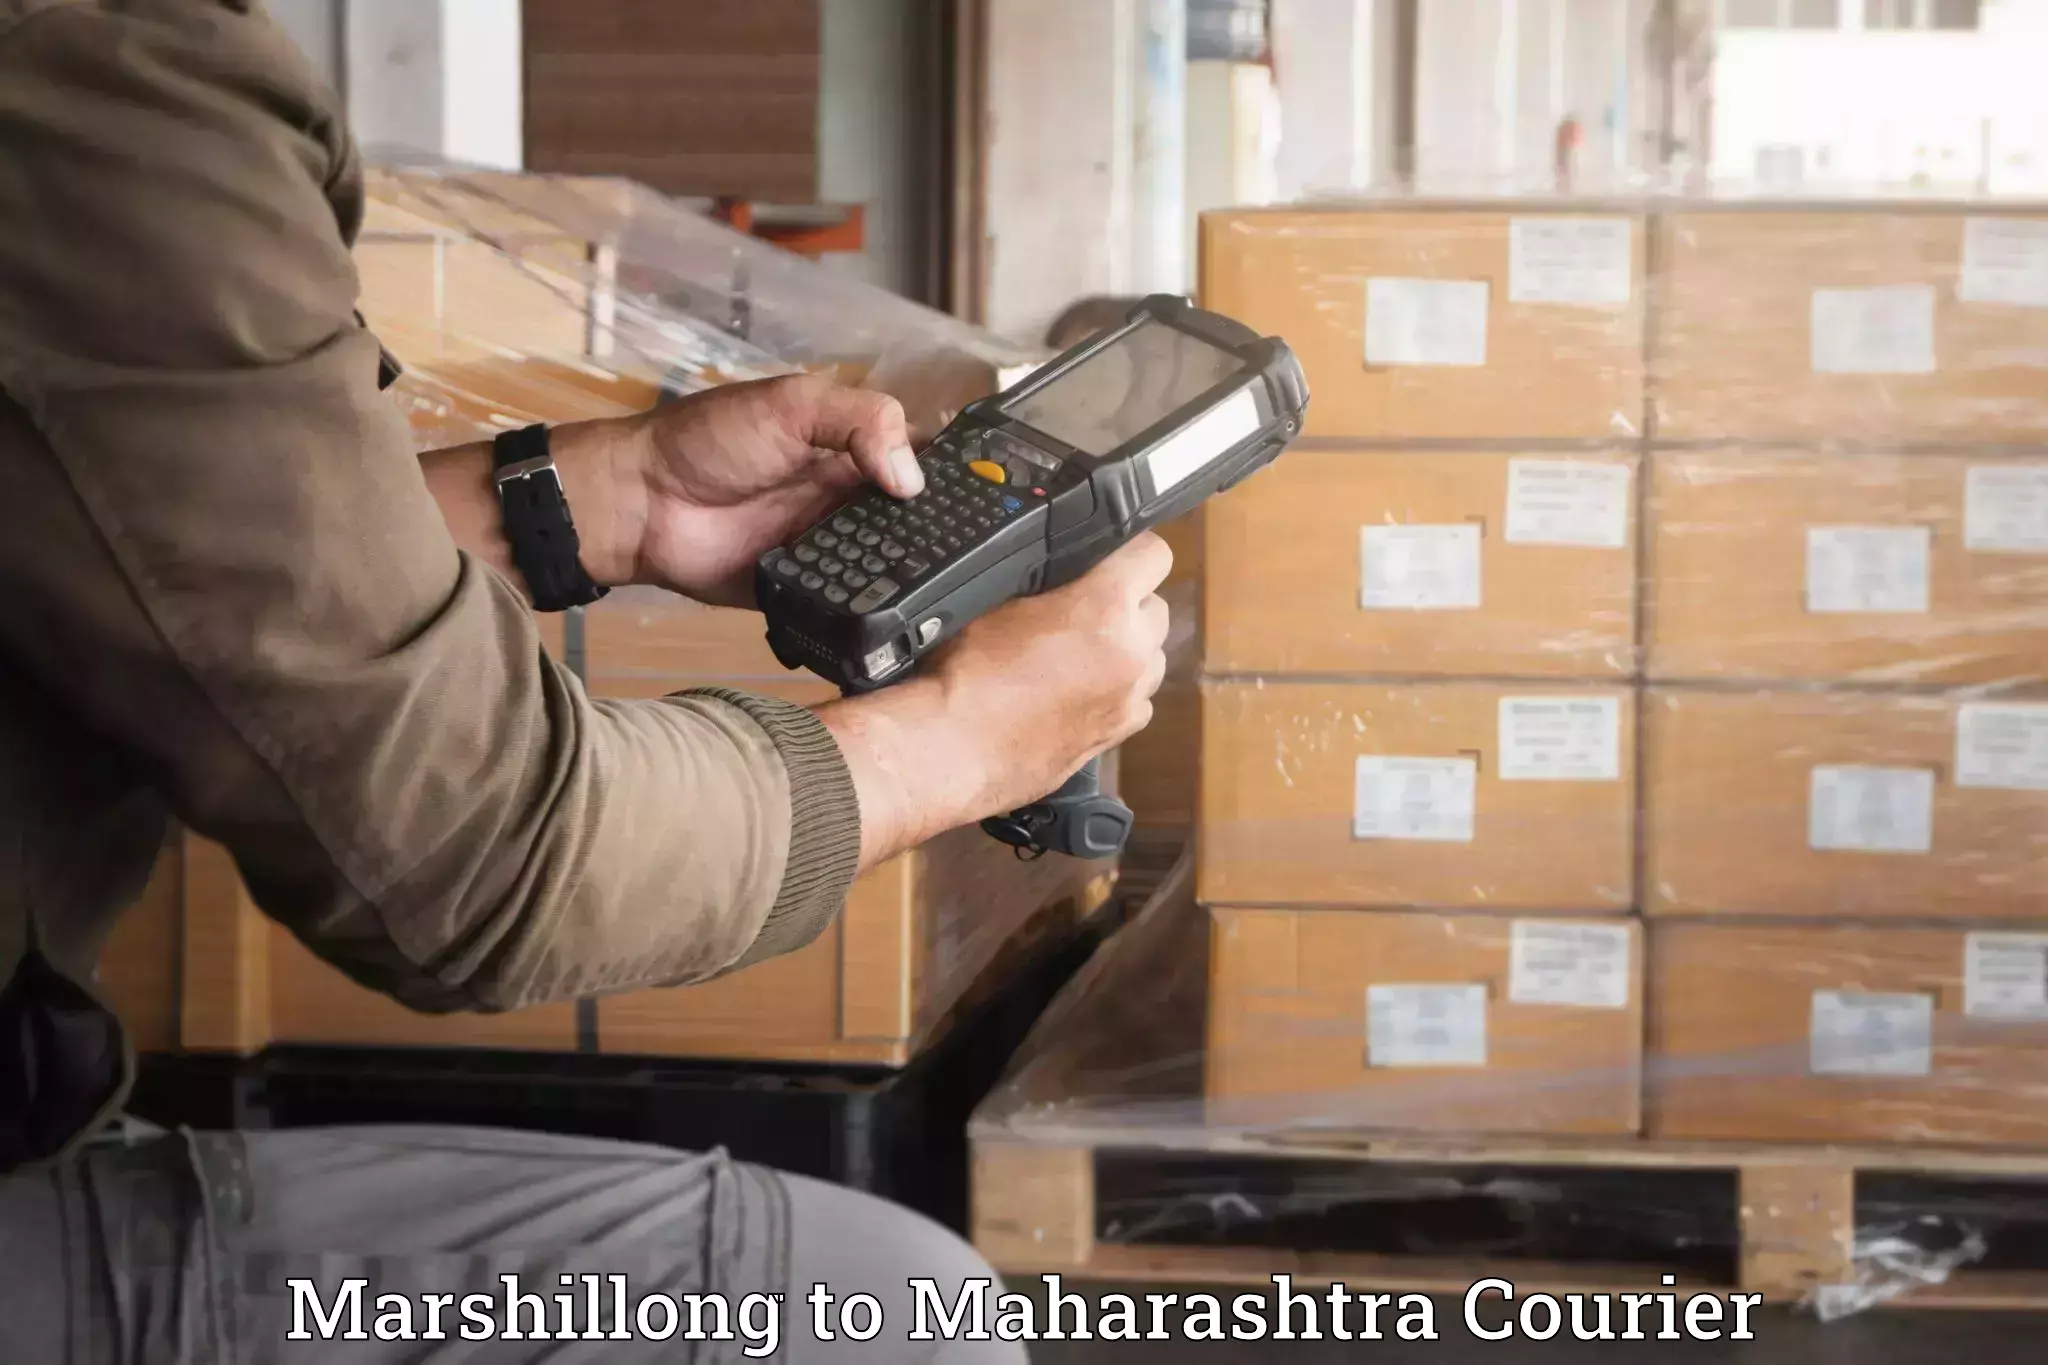 Efficient moving company in Marshillong to IIIT Nagpur